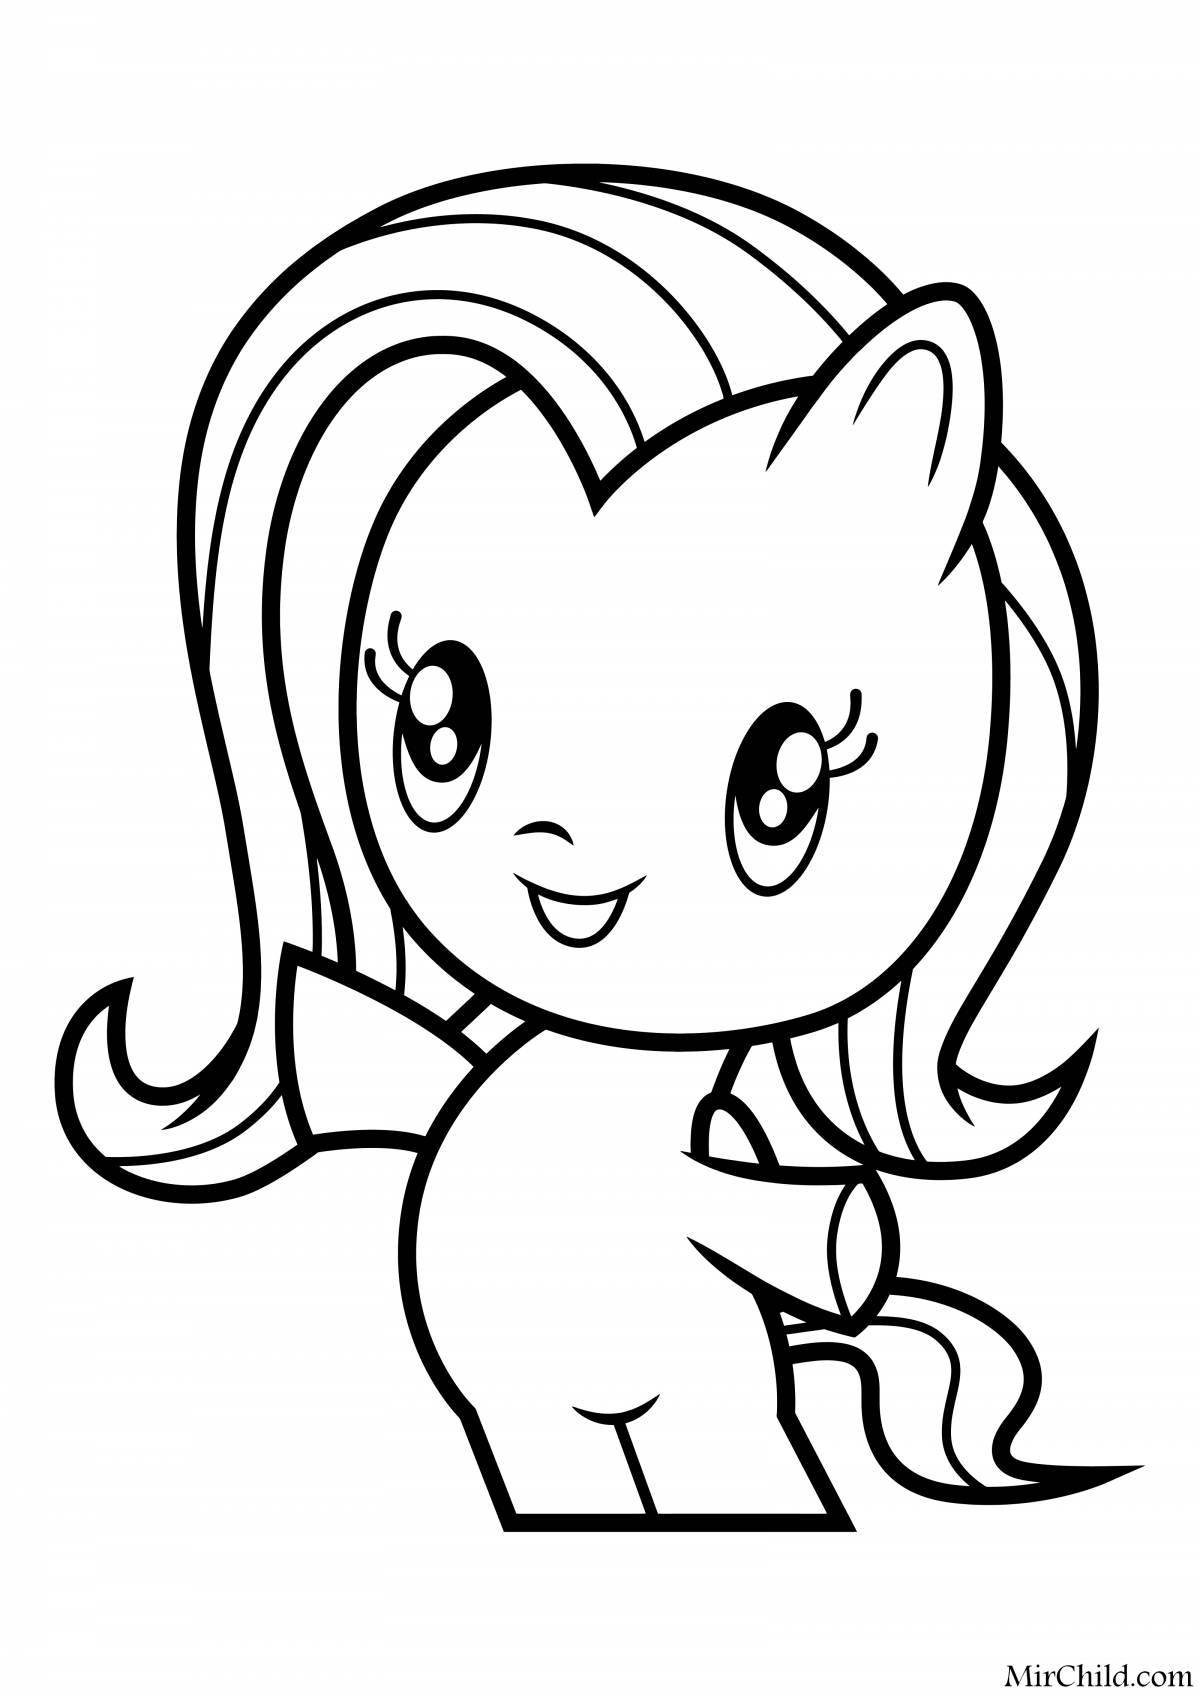 Blessed fluttershy pony coloring page